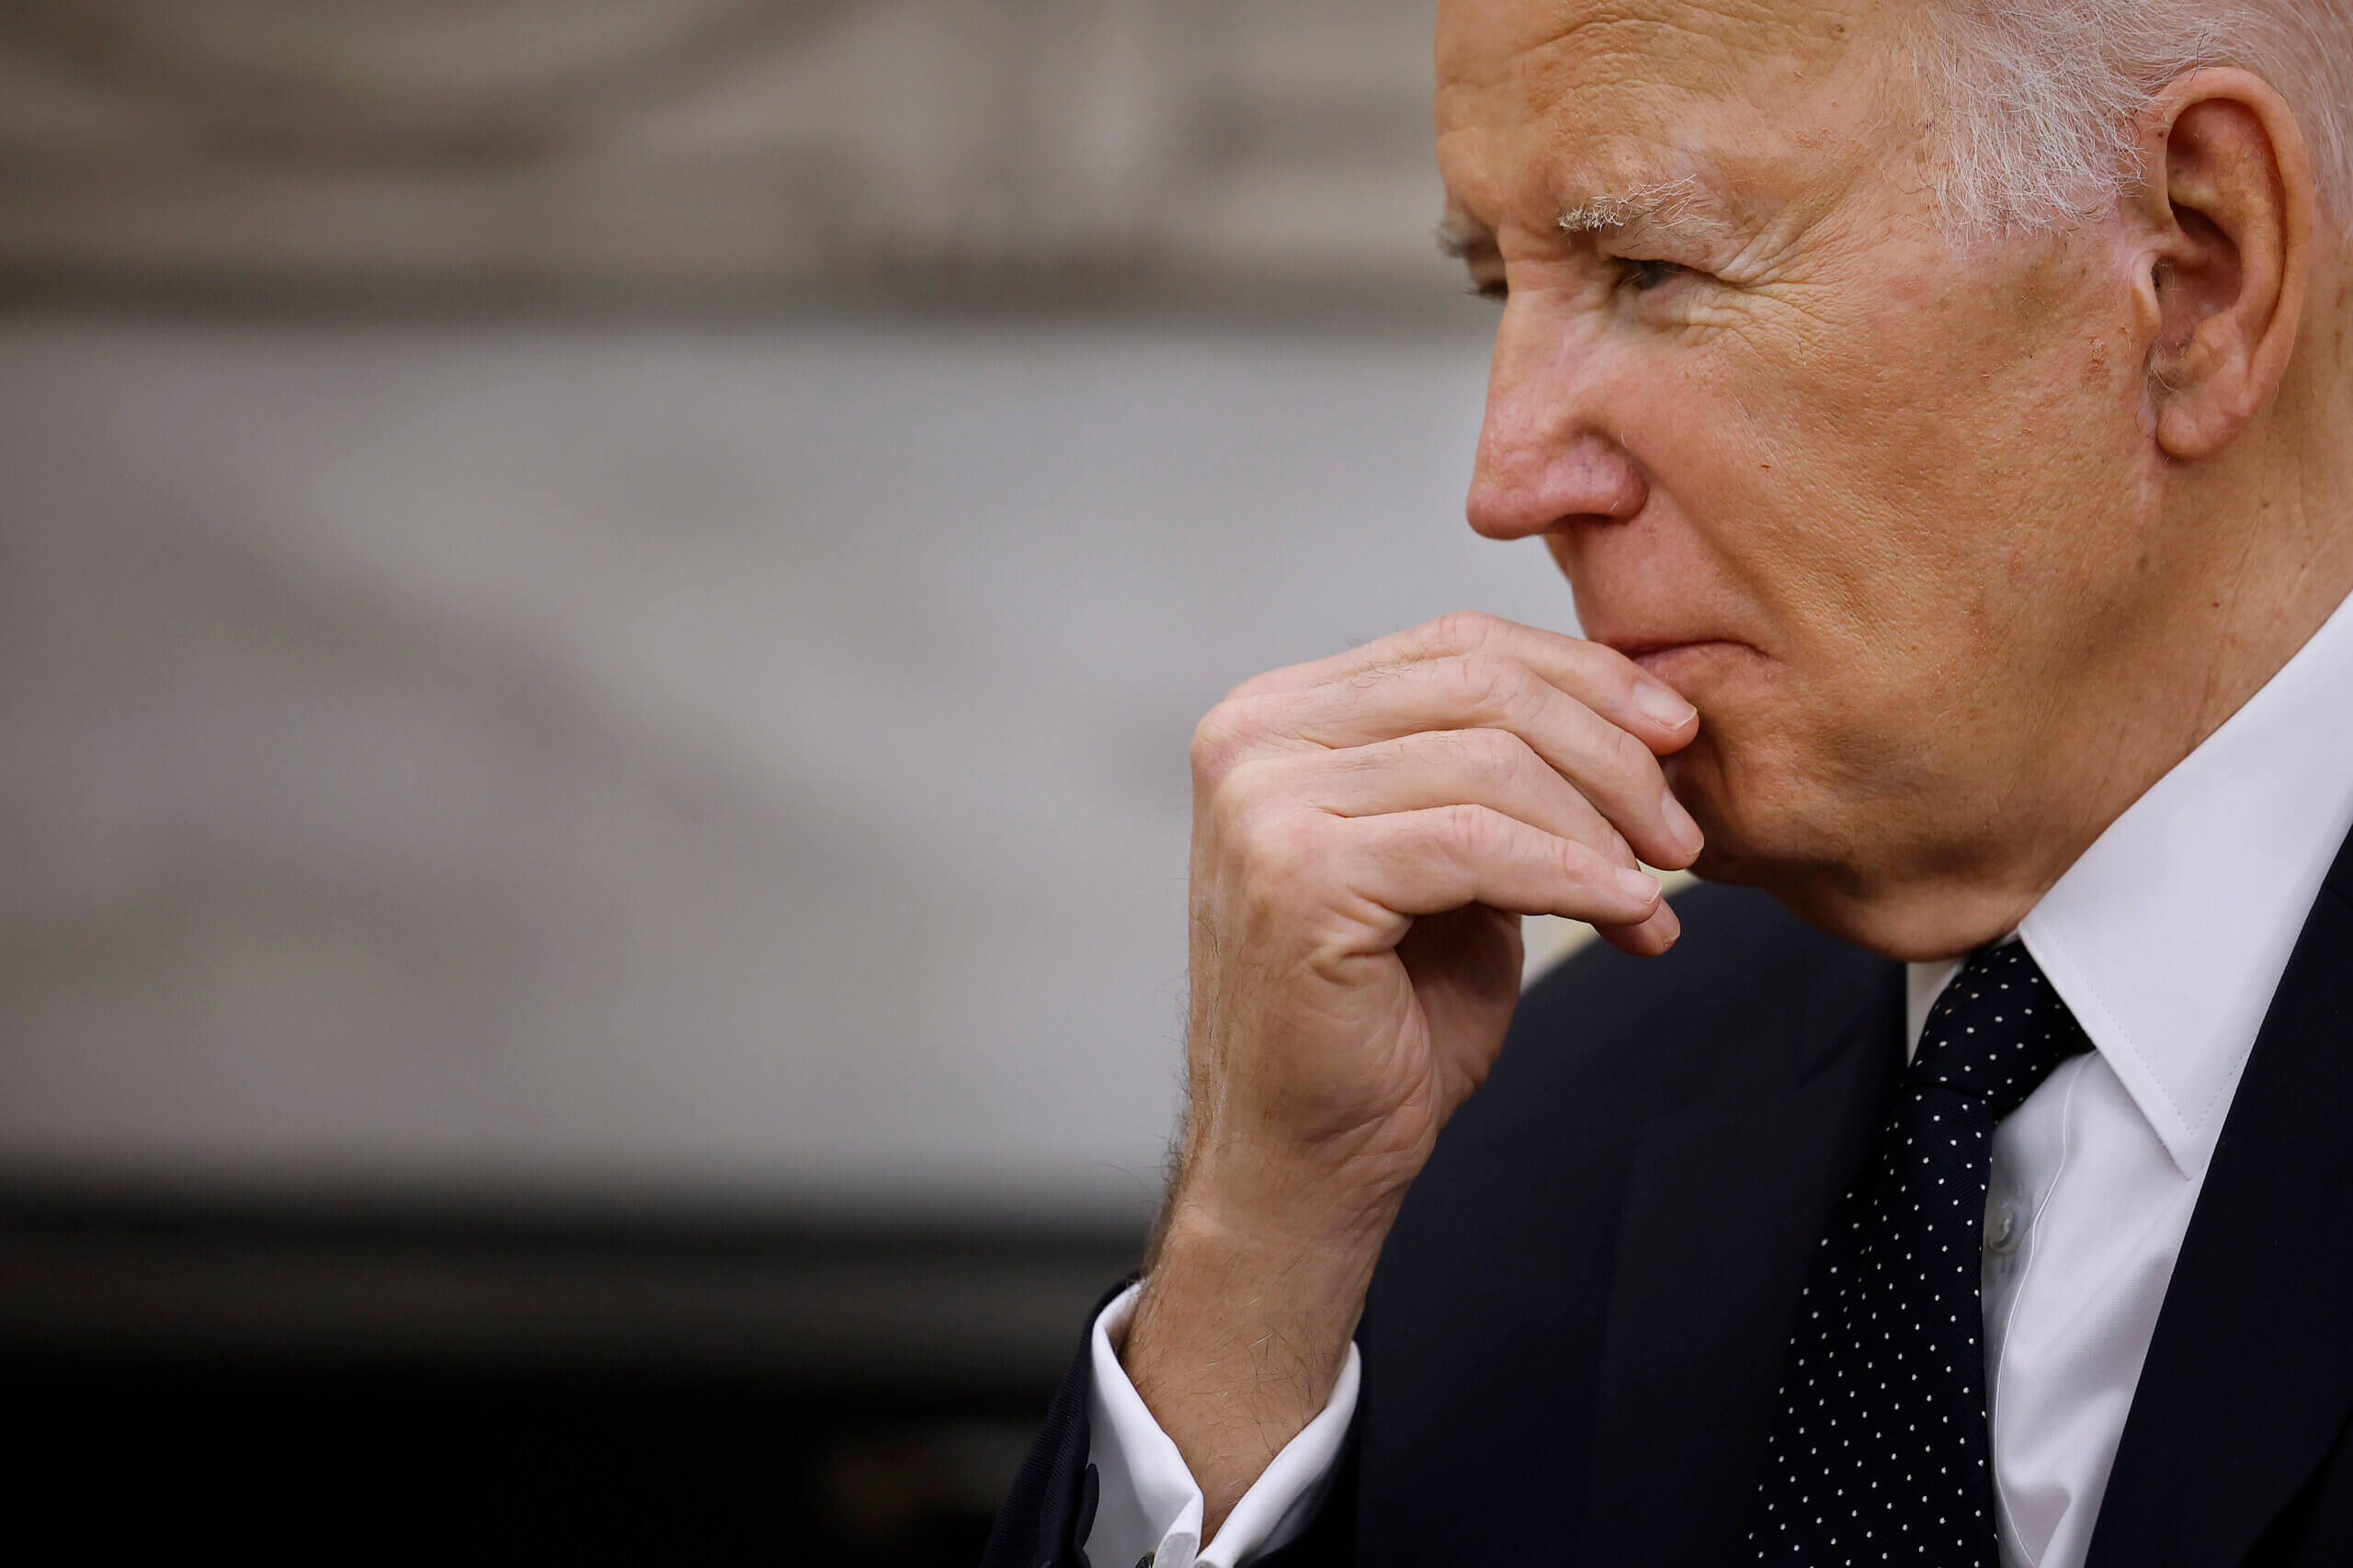 Why it matters that Biden says antisemitism has become 'ferocious'